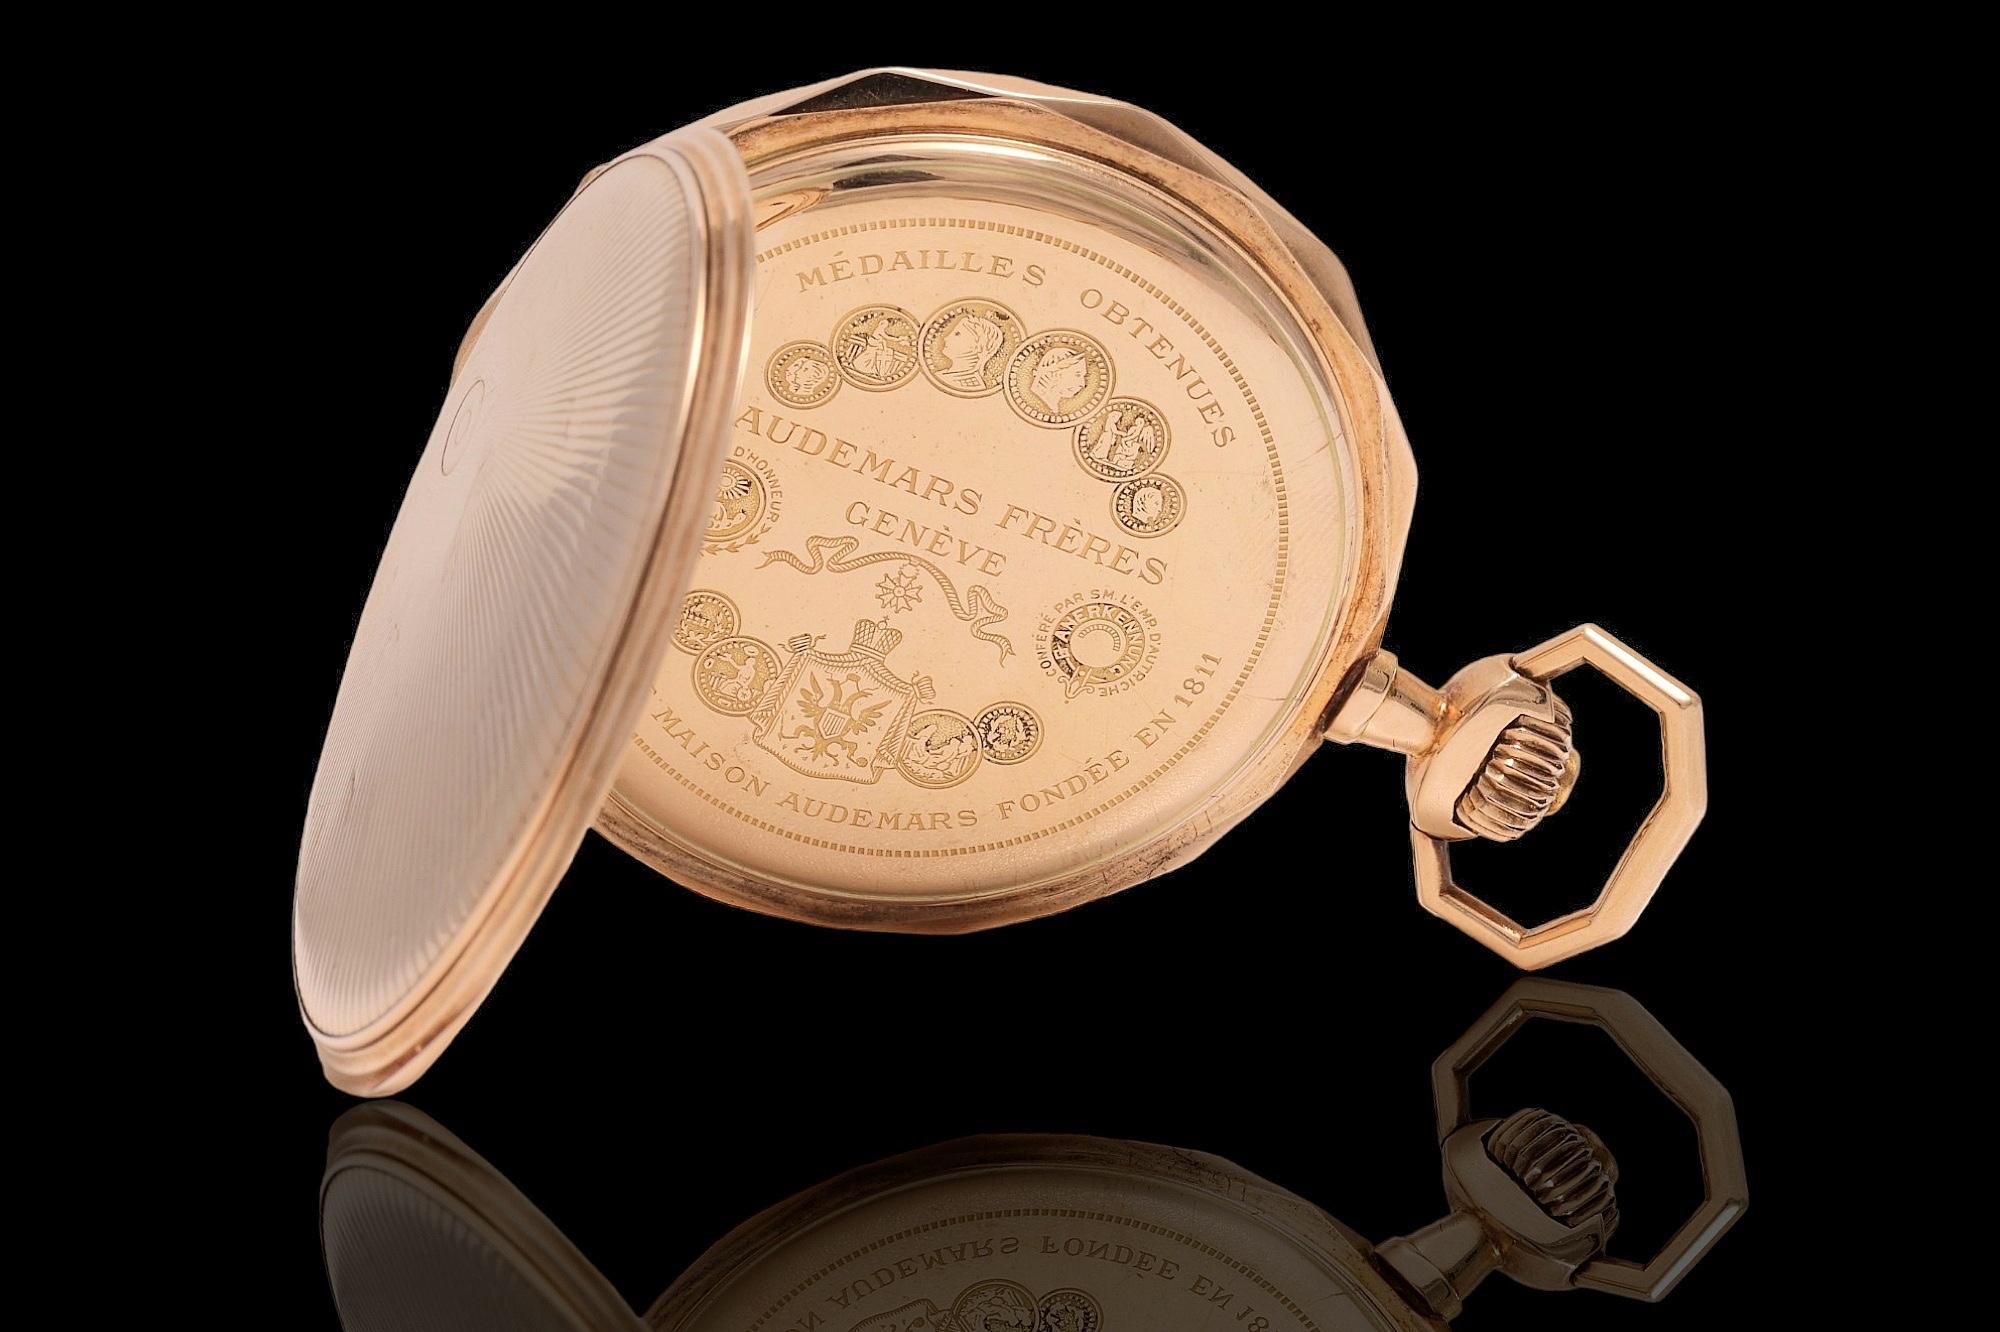 14 Kt Gold Audemars Frères Genève Pocket Watch, before Audemars Piguet founded In Excellent Condition For Sale In Antwerp, BE